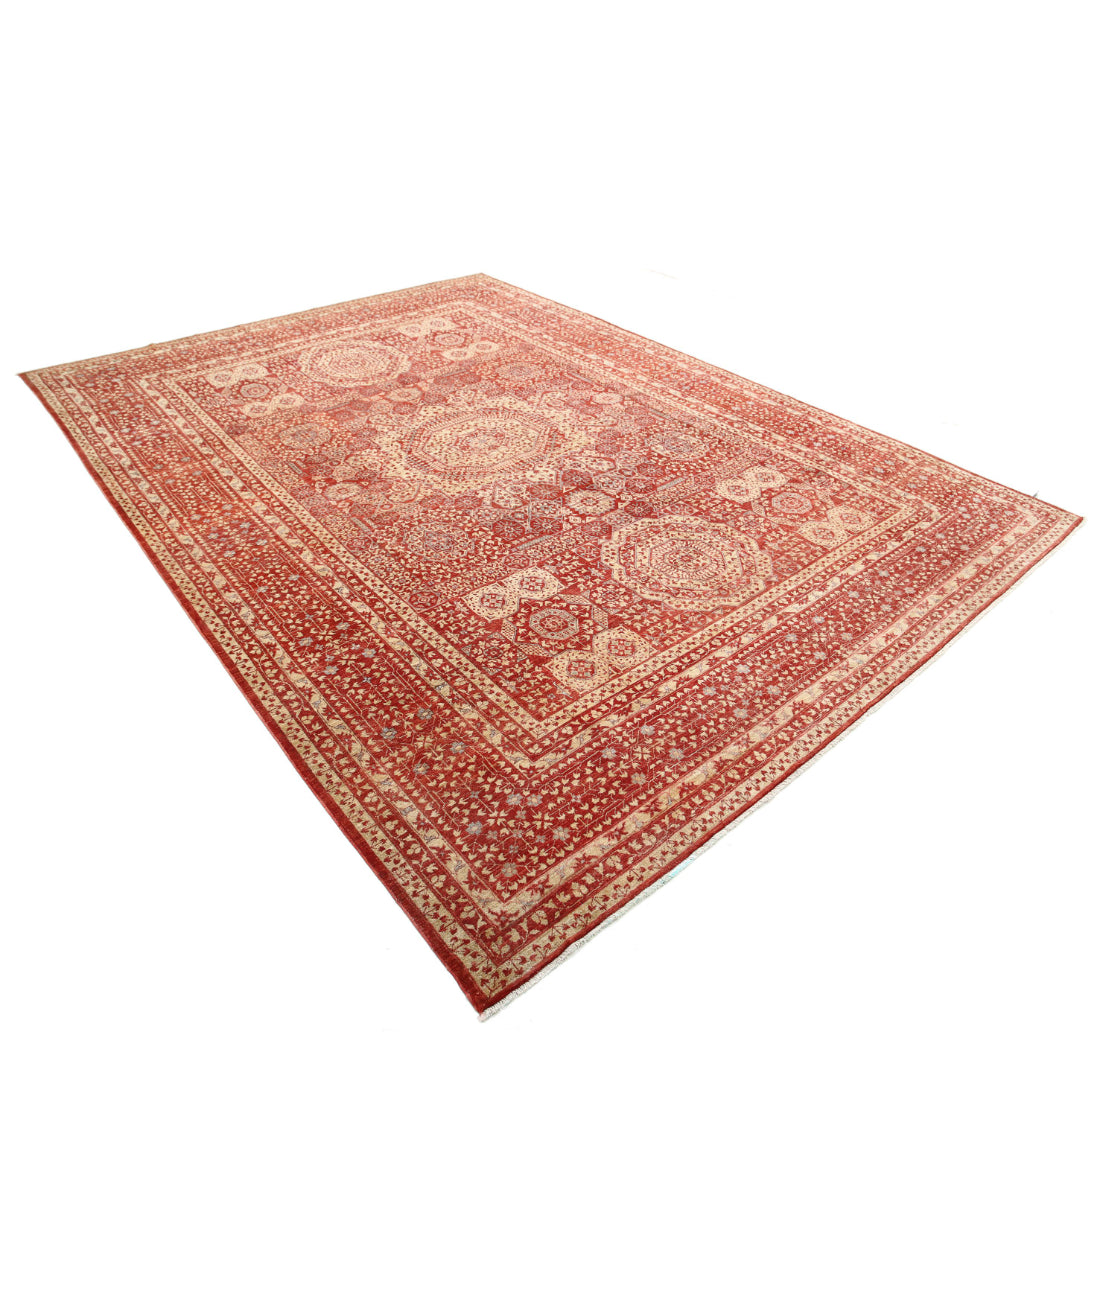 Hand Knotted Fine Mamluk Wool Rug - 8'6'' x 11'9'' 8'6'' x 11'9'' (255 X 353) / Red / Ivory